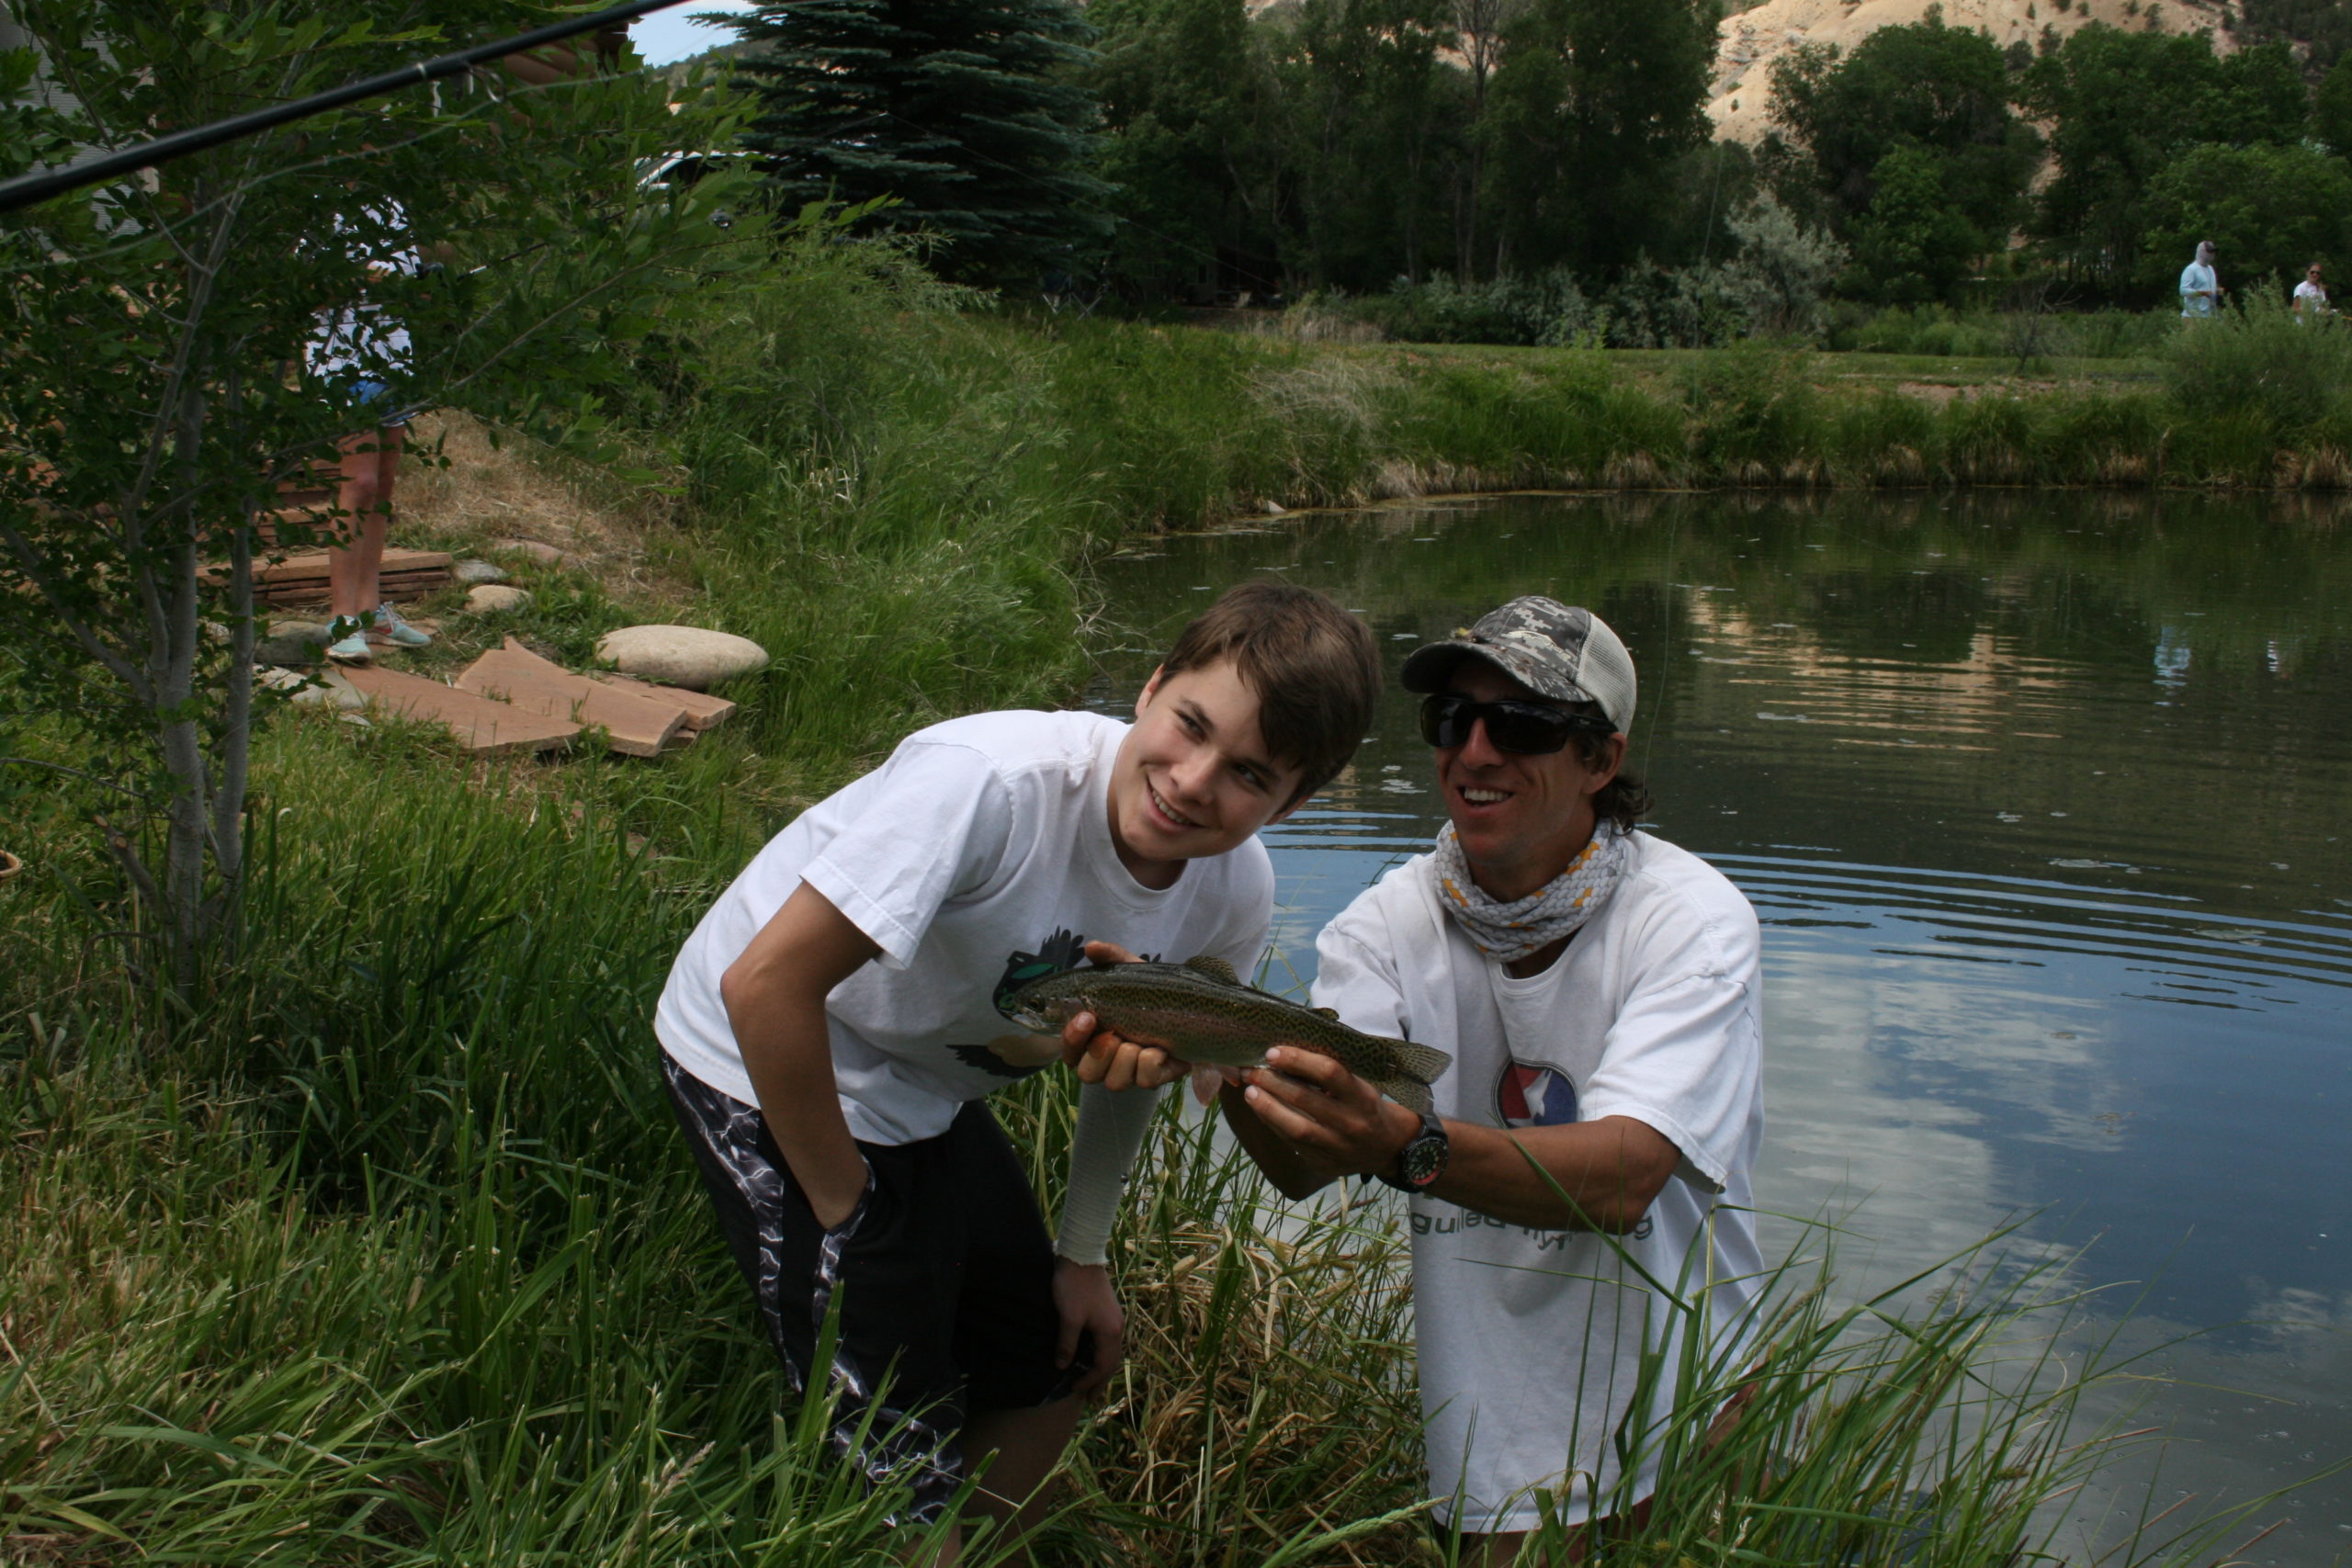 Fasi and Benno - catching fish with Aspen Trout Guides